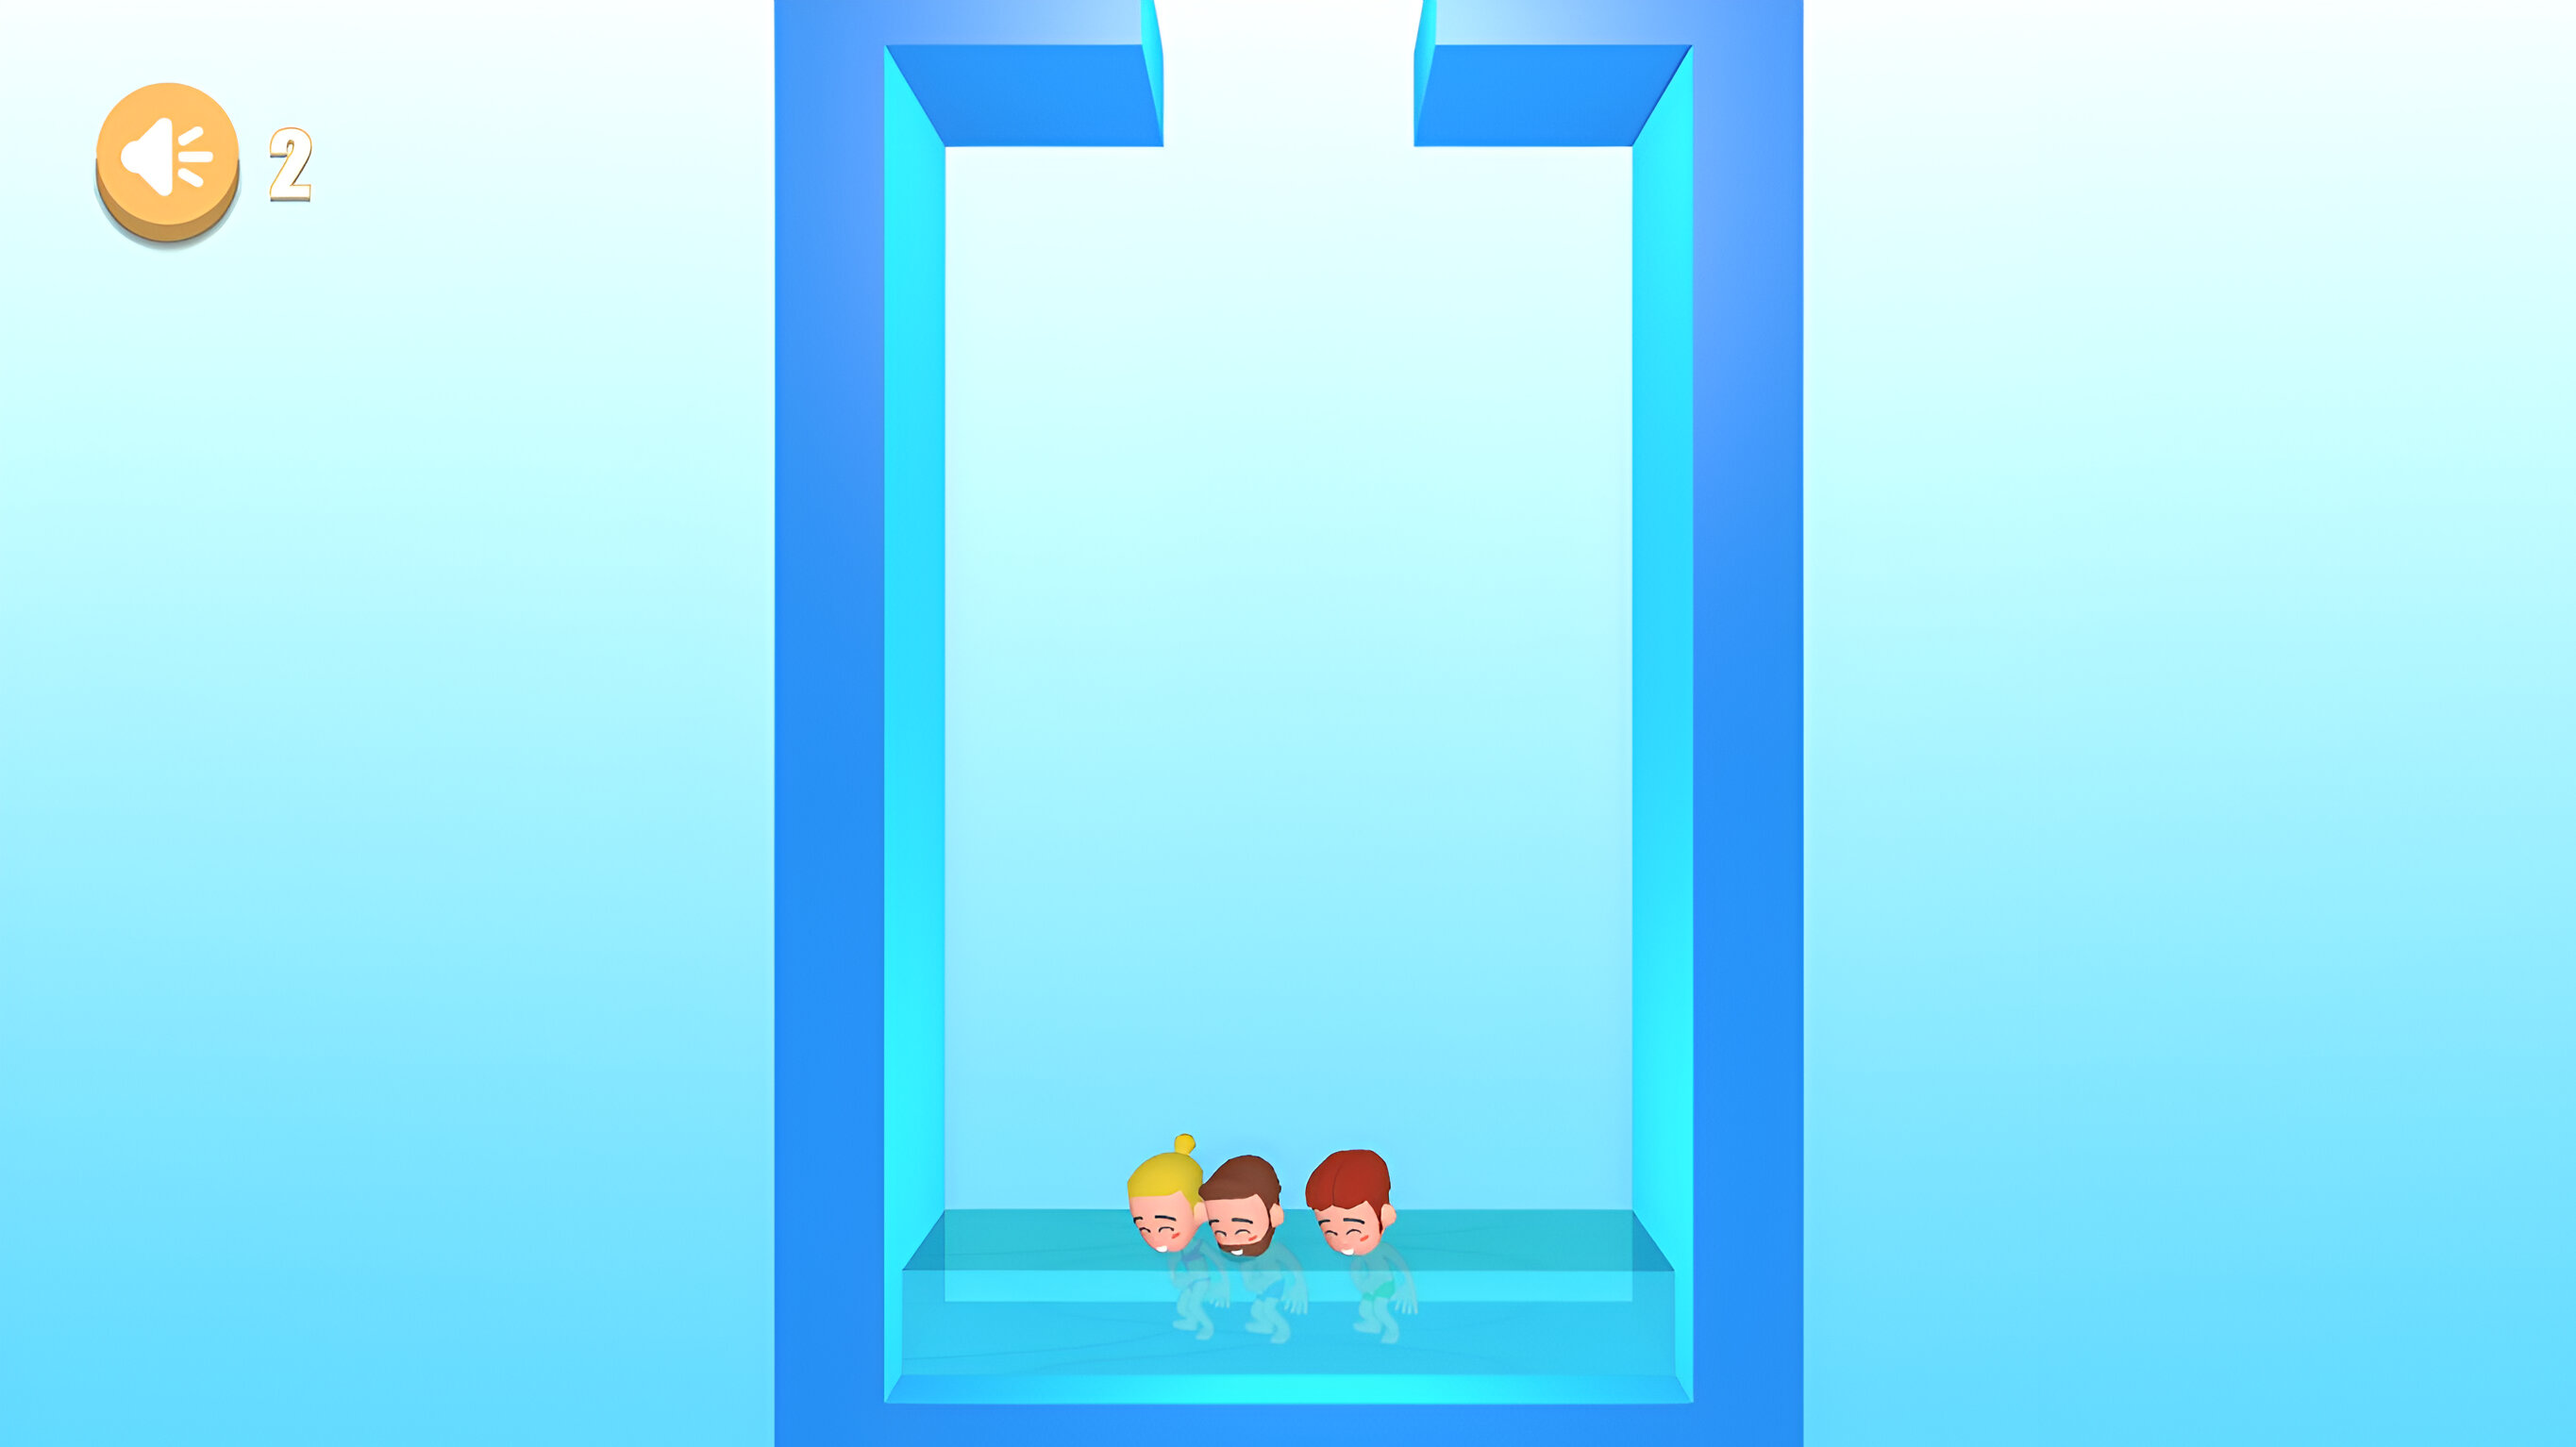 Image Pipe Puzzle - Play Free Online Puzzle Game